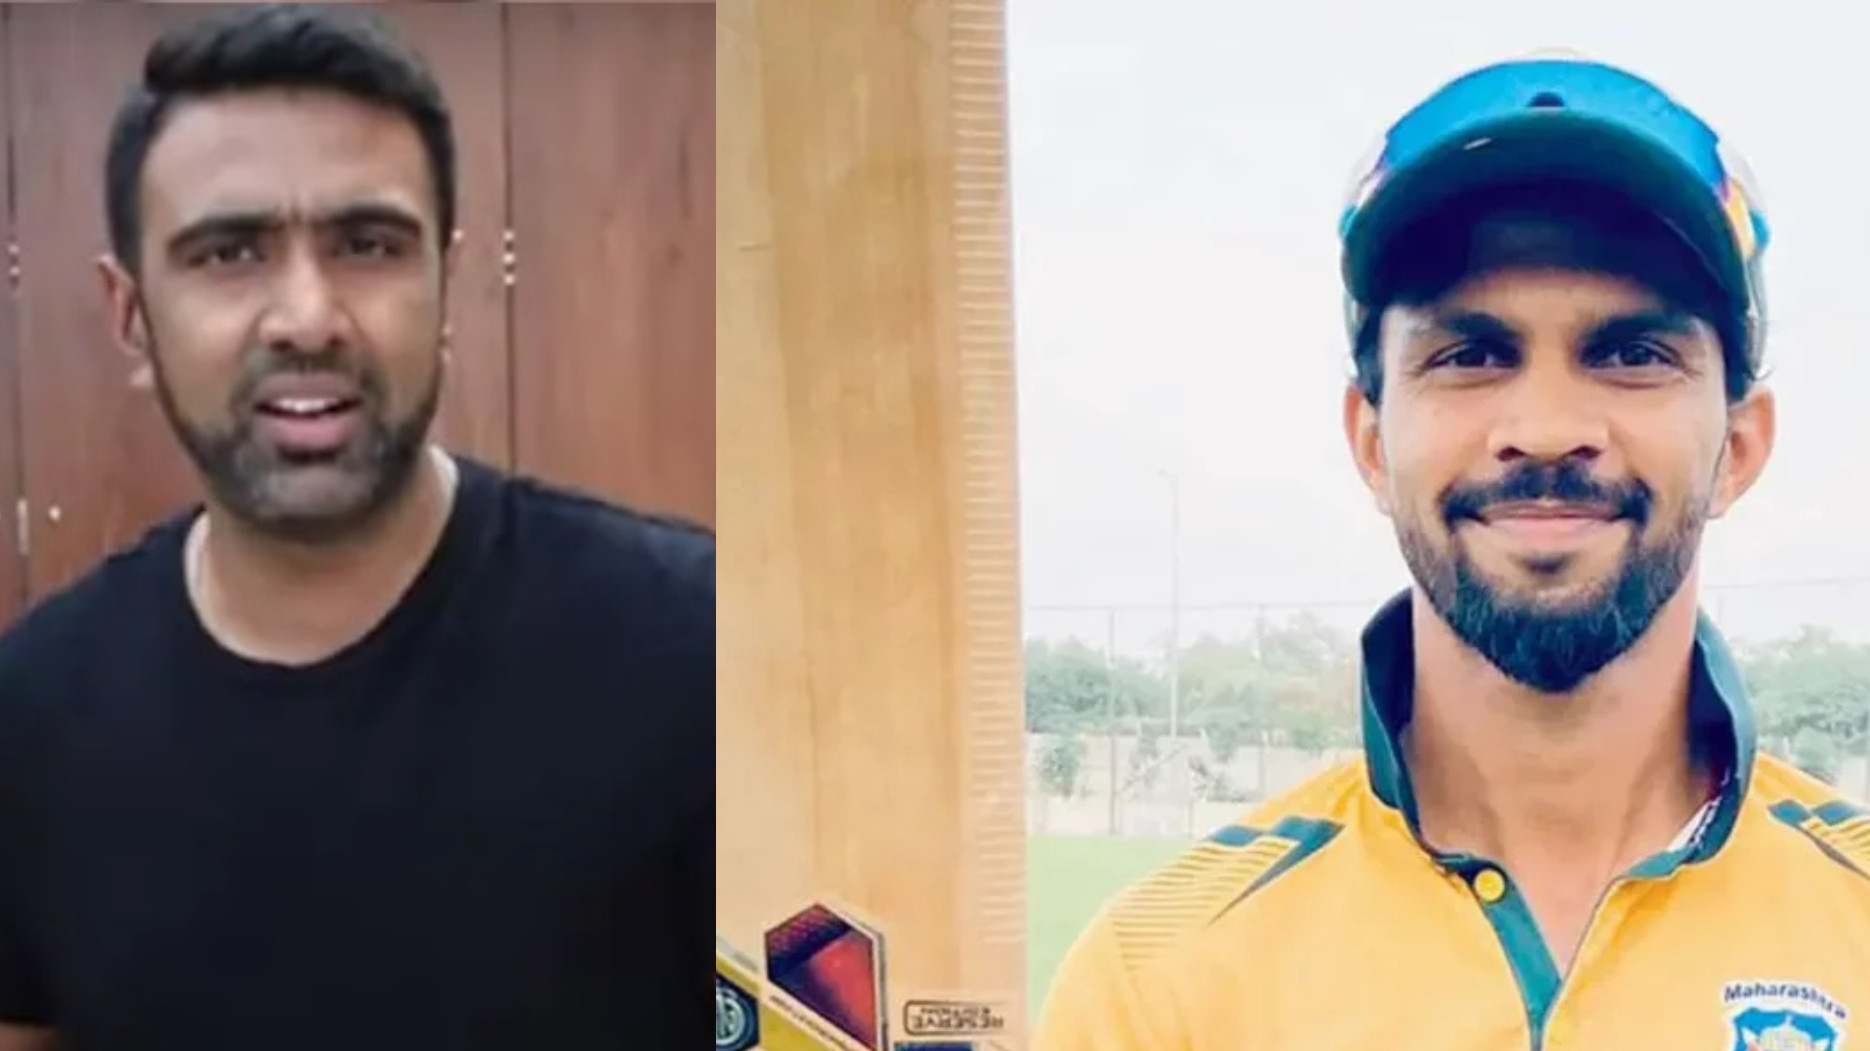 'Look who he is competing with’ - R Ashwin points out harsh reality for Ruturaj Gaikwad in relation to India spot